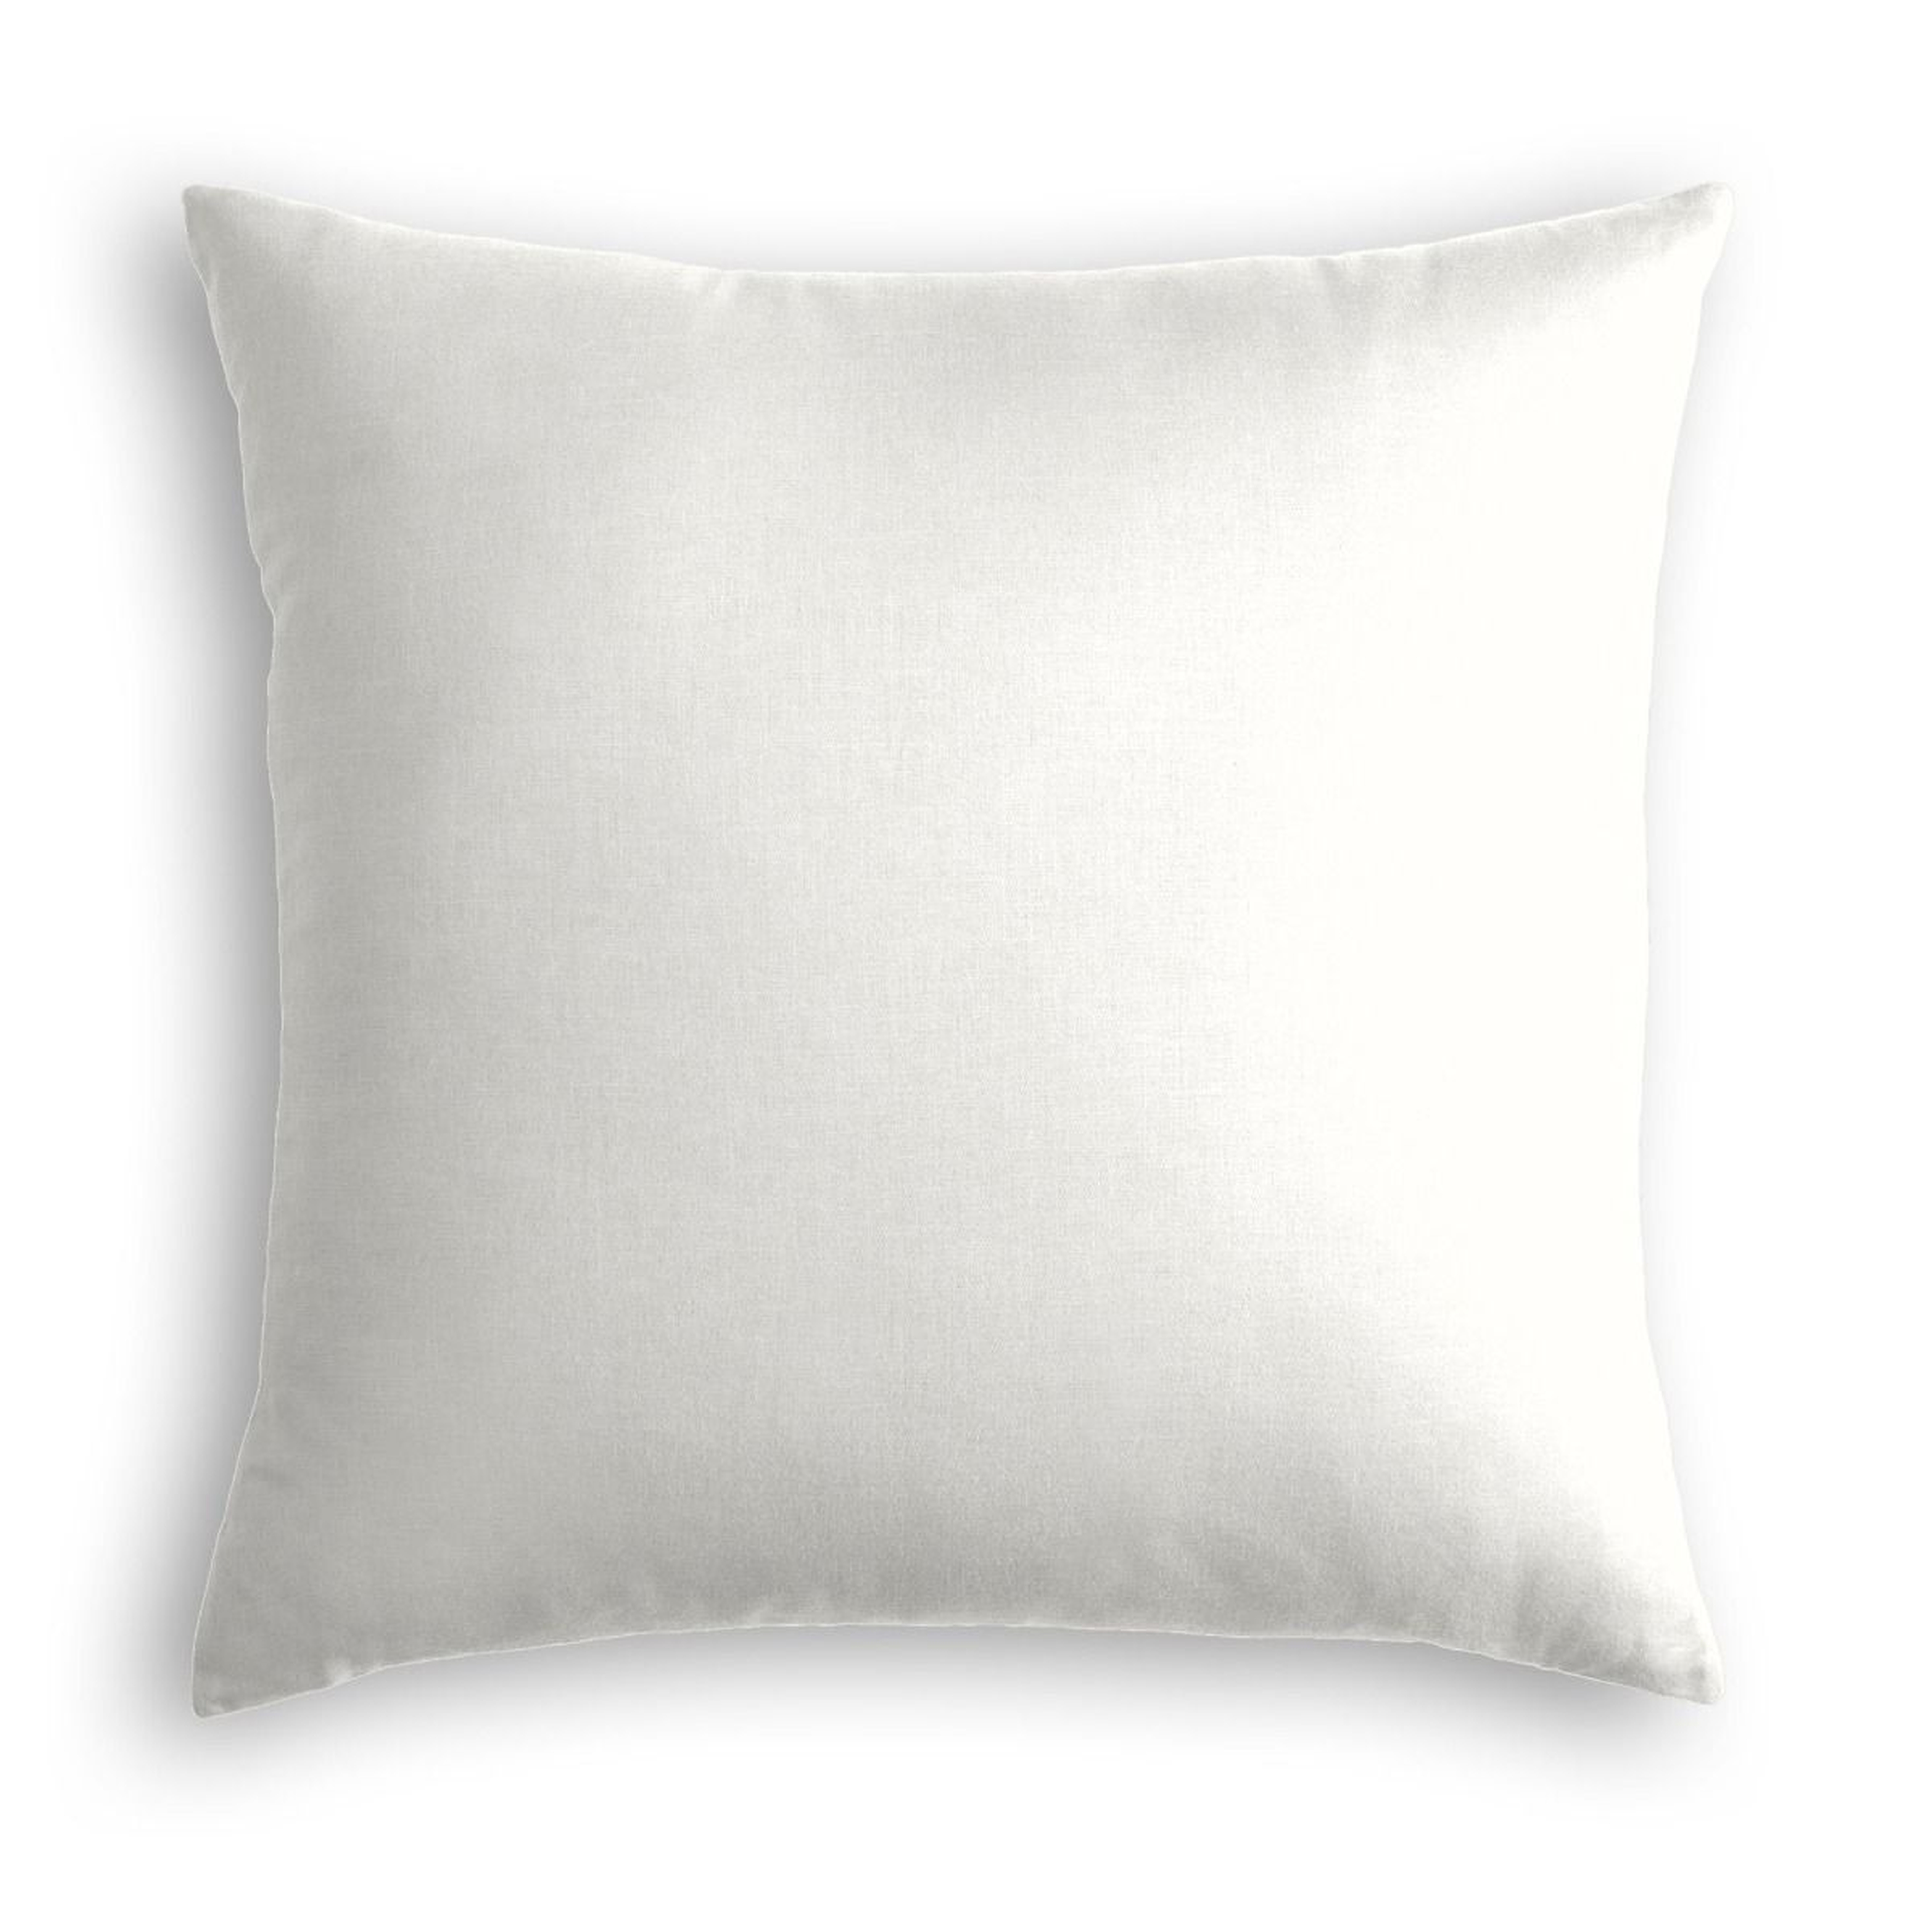 Classic Linen Pillow, Ivory, 22" x 22" - Havenly Essentials